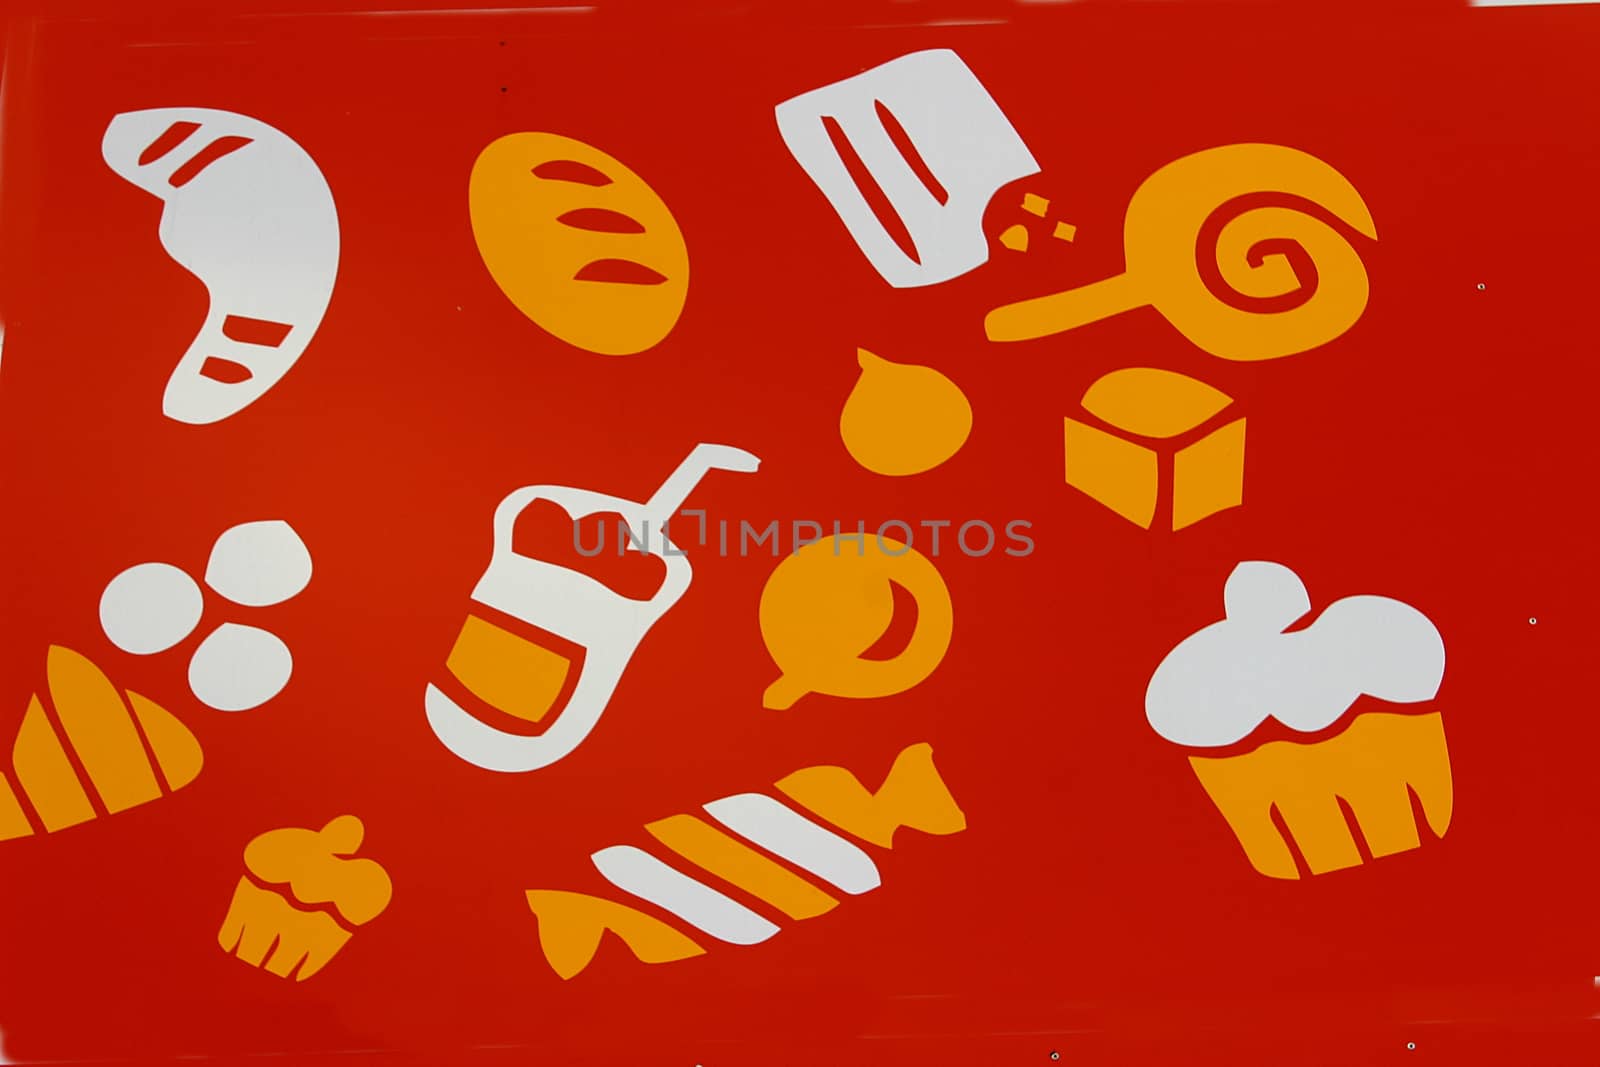 On an orange background drawings of various confectionery